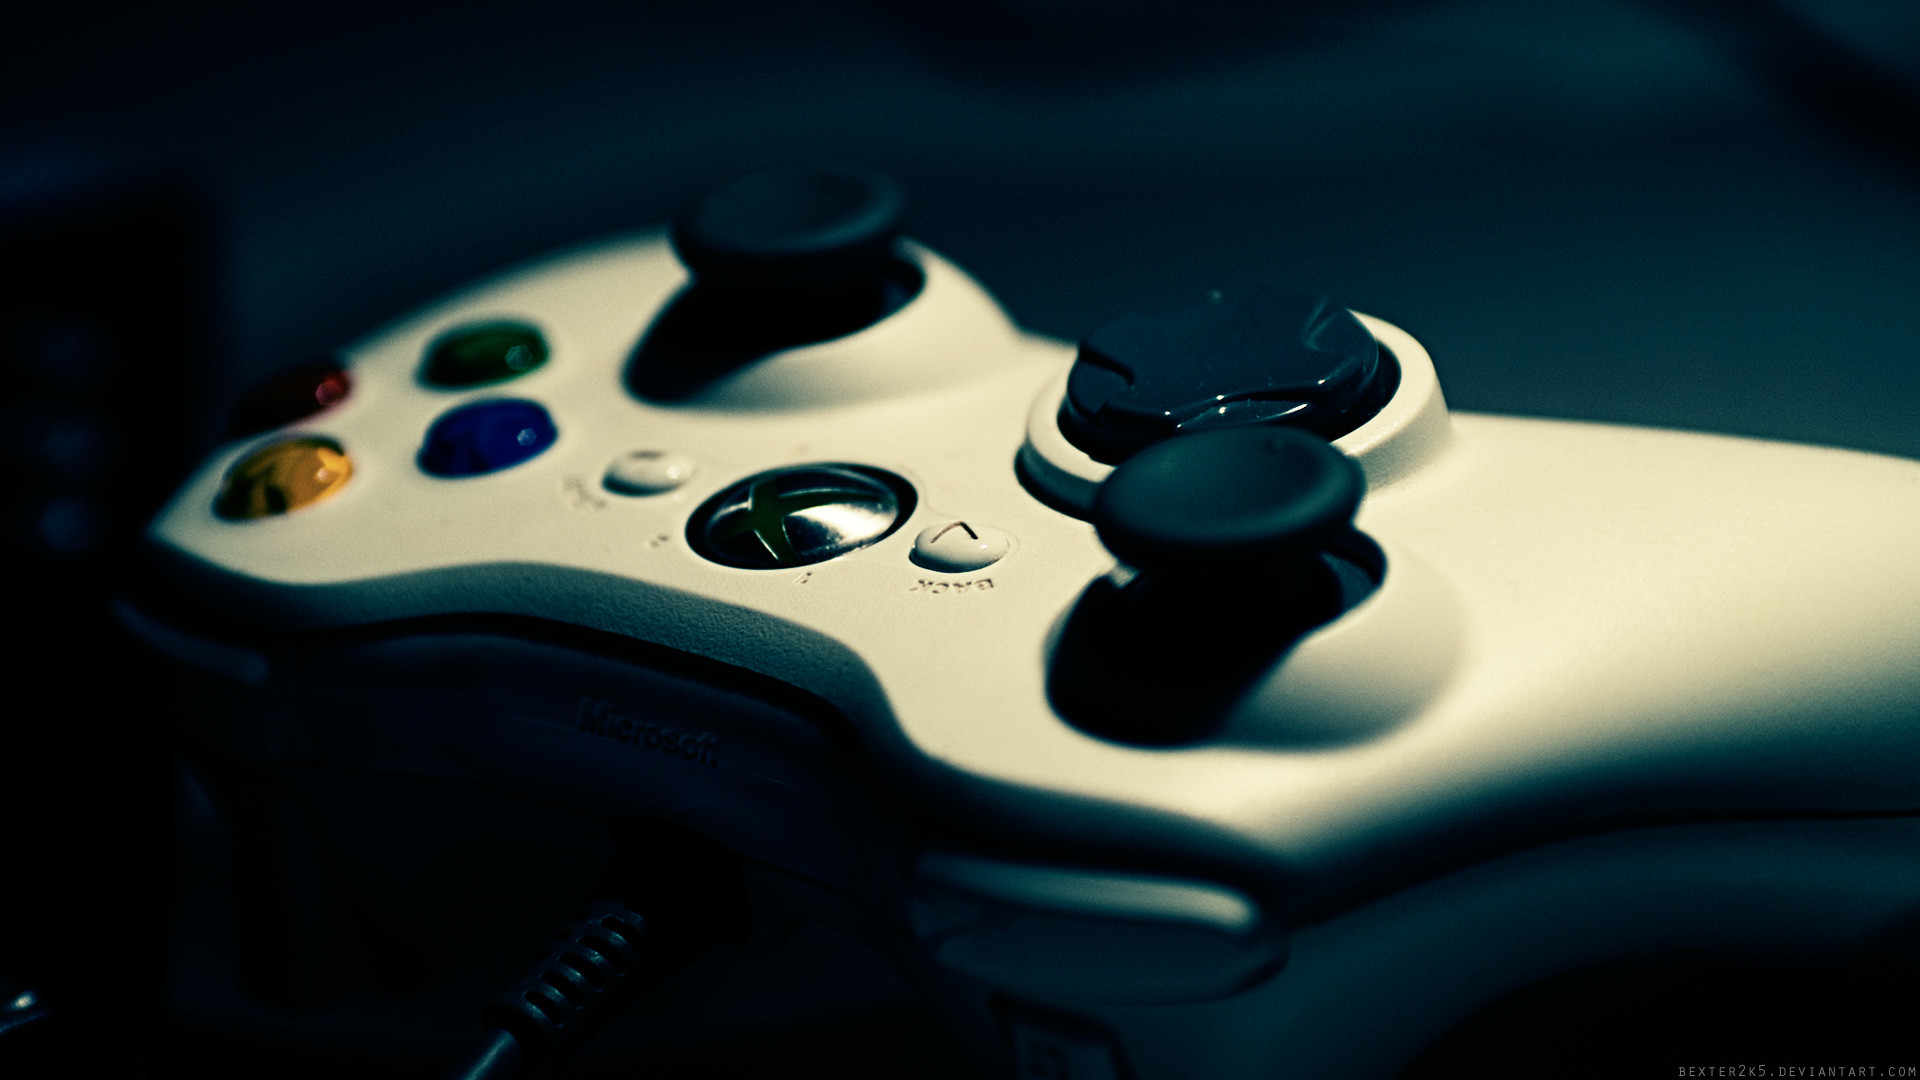 Xbox 360 Game Controller Video Games / Wallpaper Picture on VisualizeUs